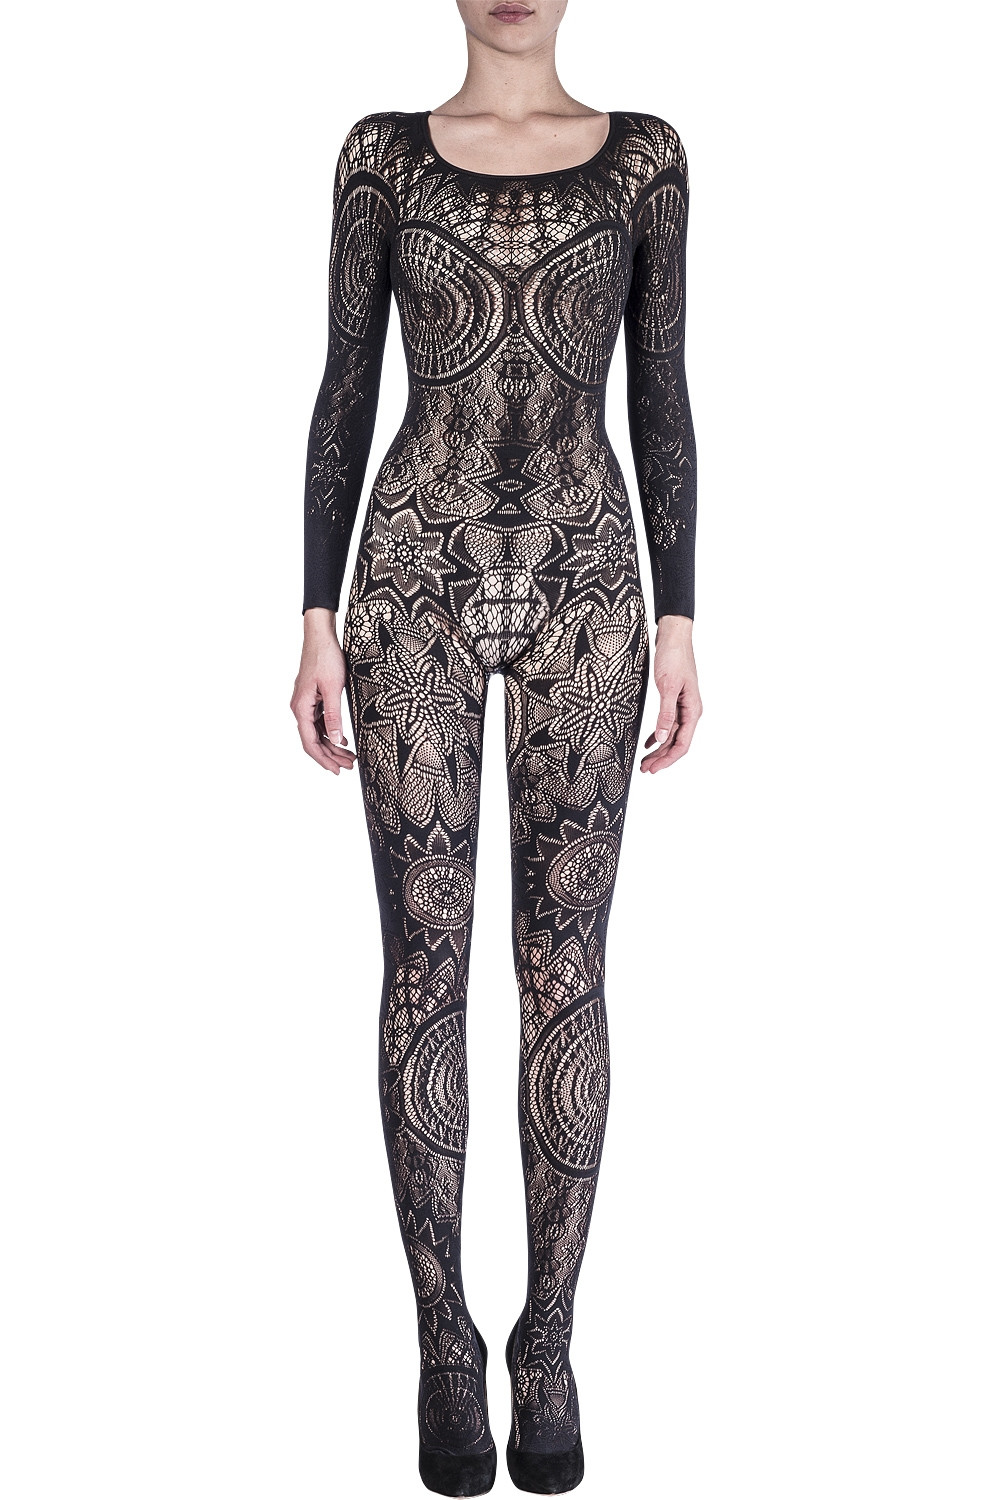 Jumpsuits for Women  Intriguing, seductive bodysuits and